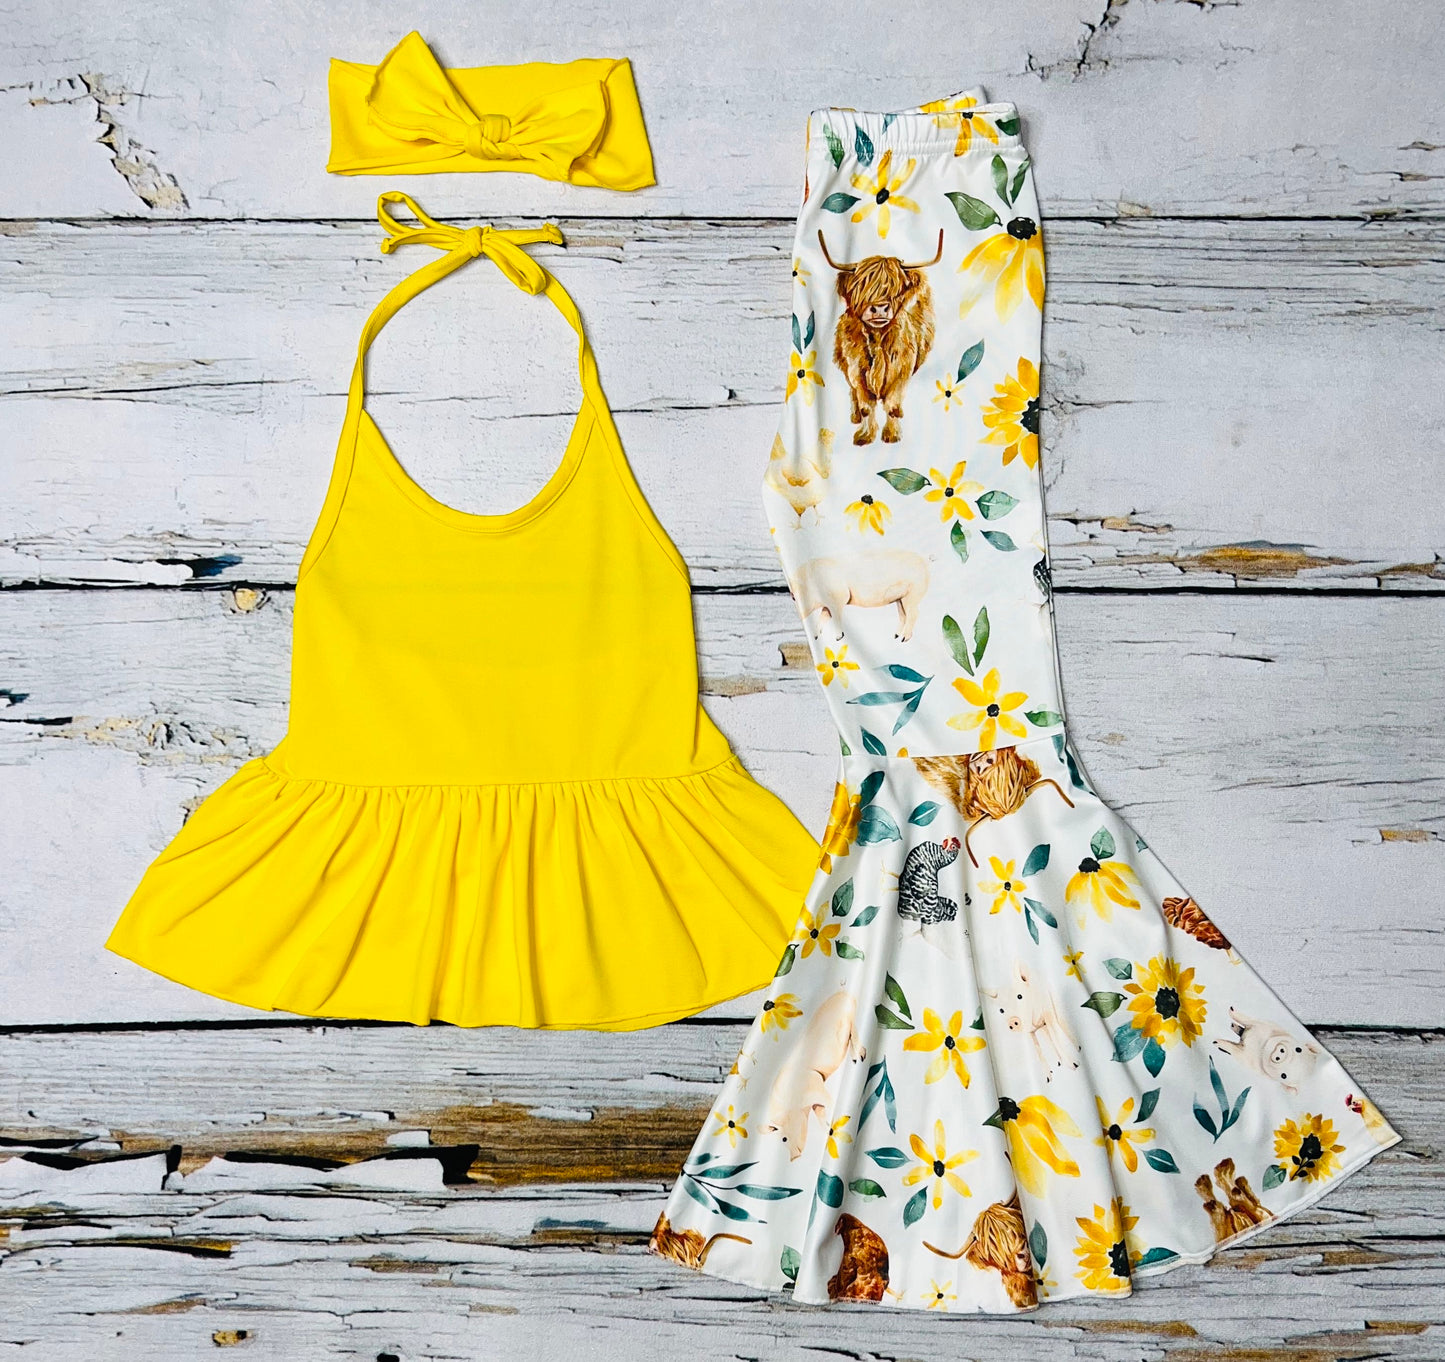 Yellow halter top w/floral bell bottoms 3pc set DLH1224-13